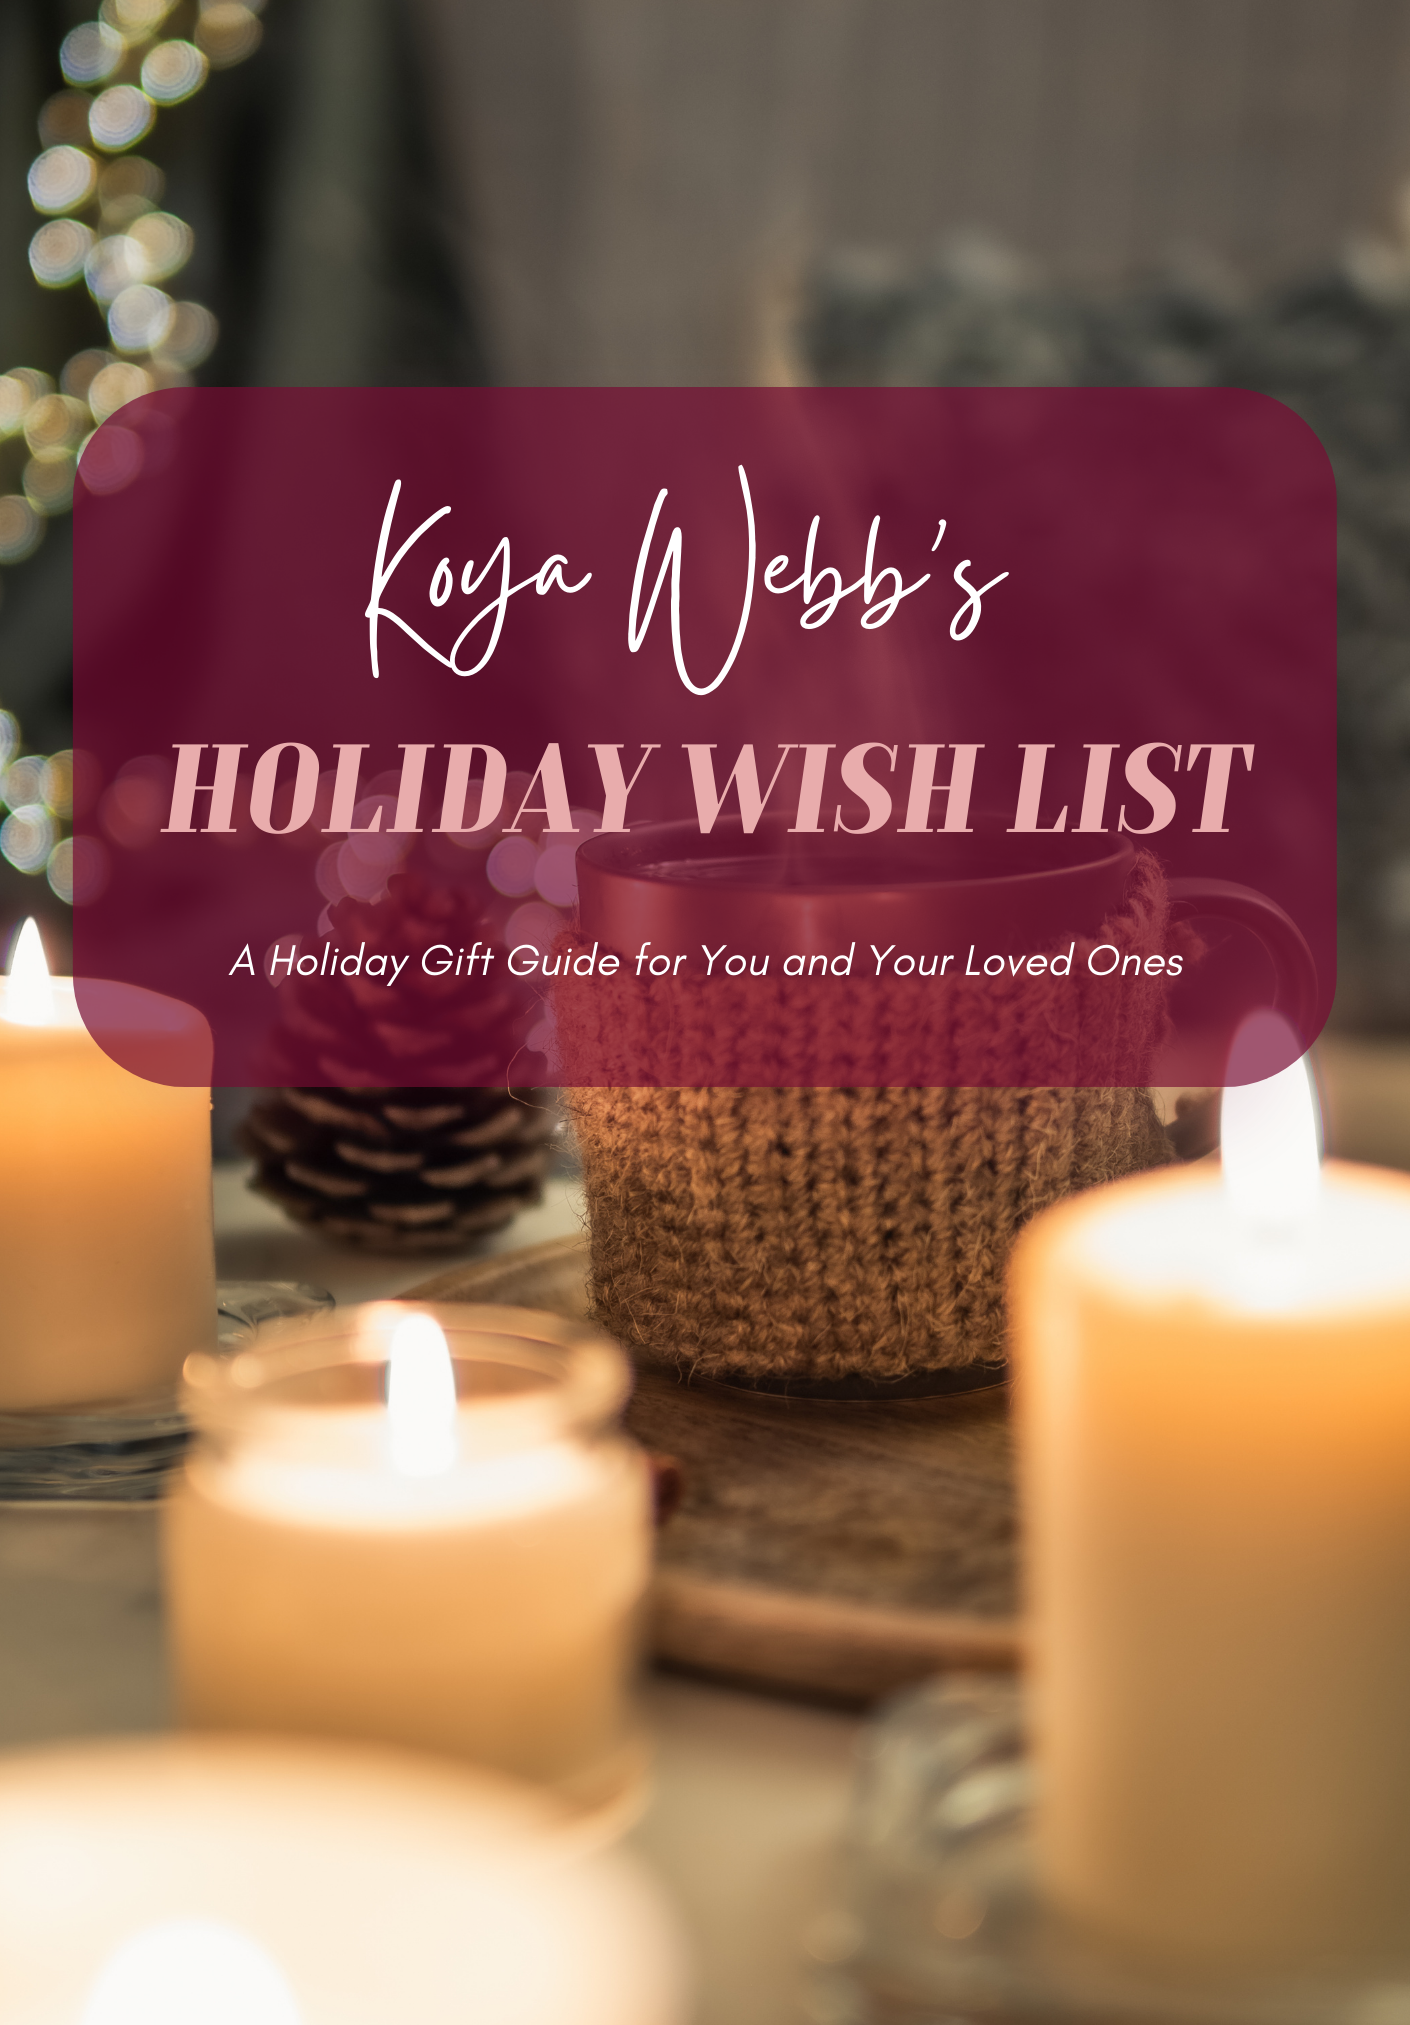 What’s On My Wish List - Koya Webb’s Get Loved Up 2022 Holiday Wish List